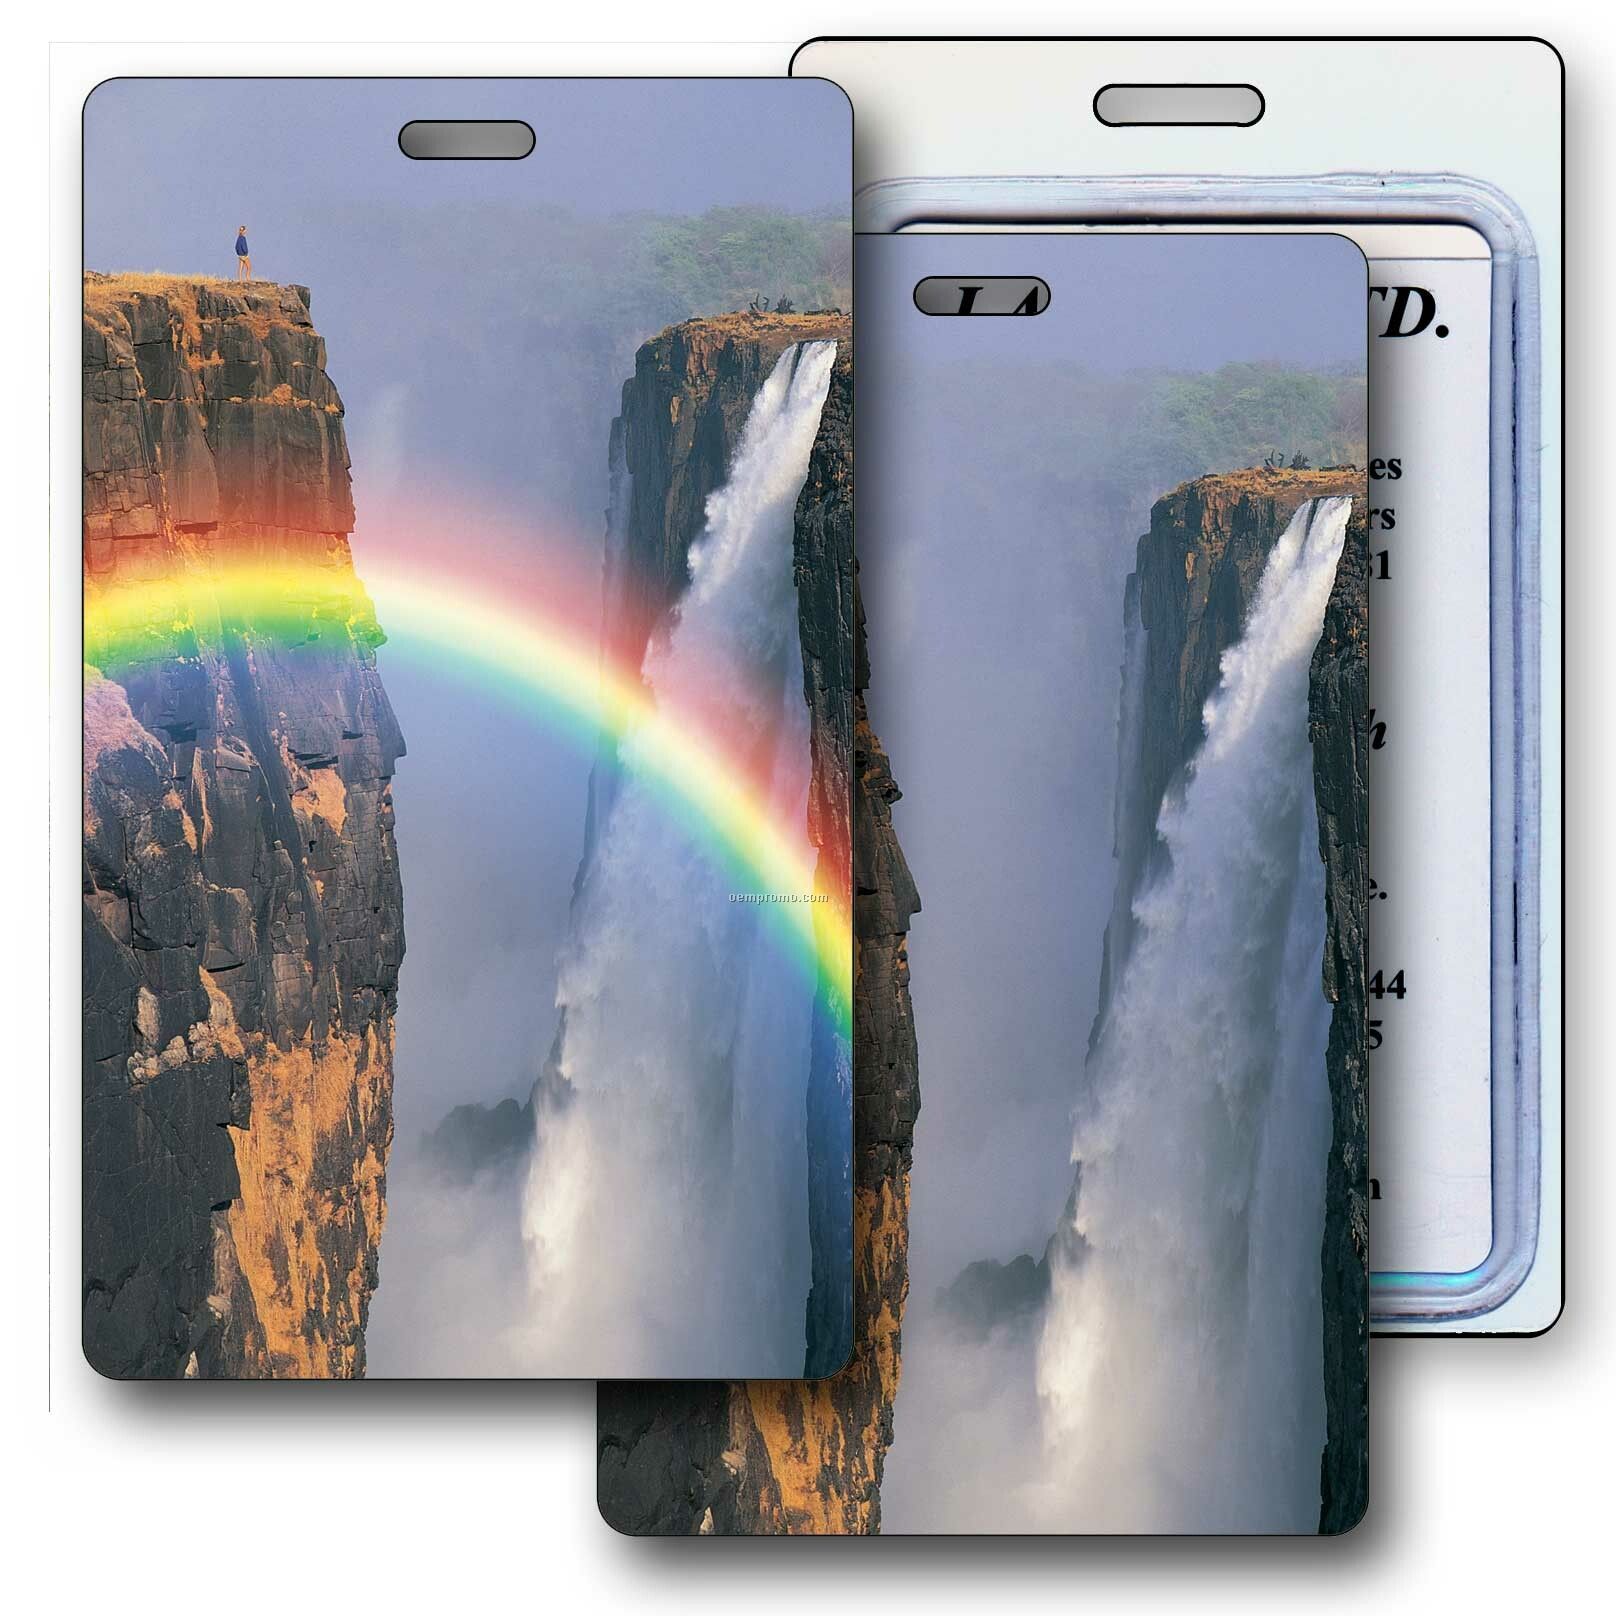 Luggage Tag 3d Lenticular Rainbow, Waterfalls Stock Image (Imprint Product)